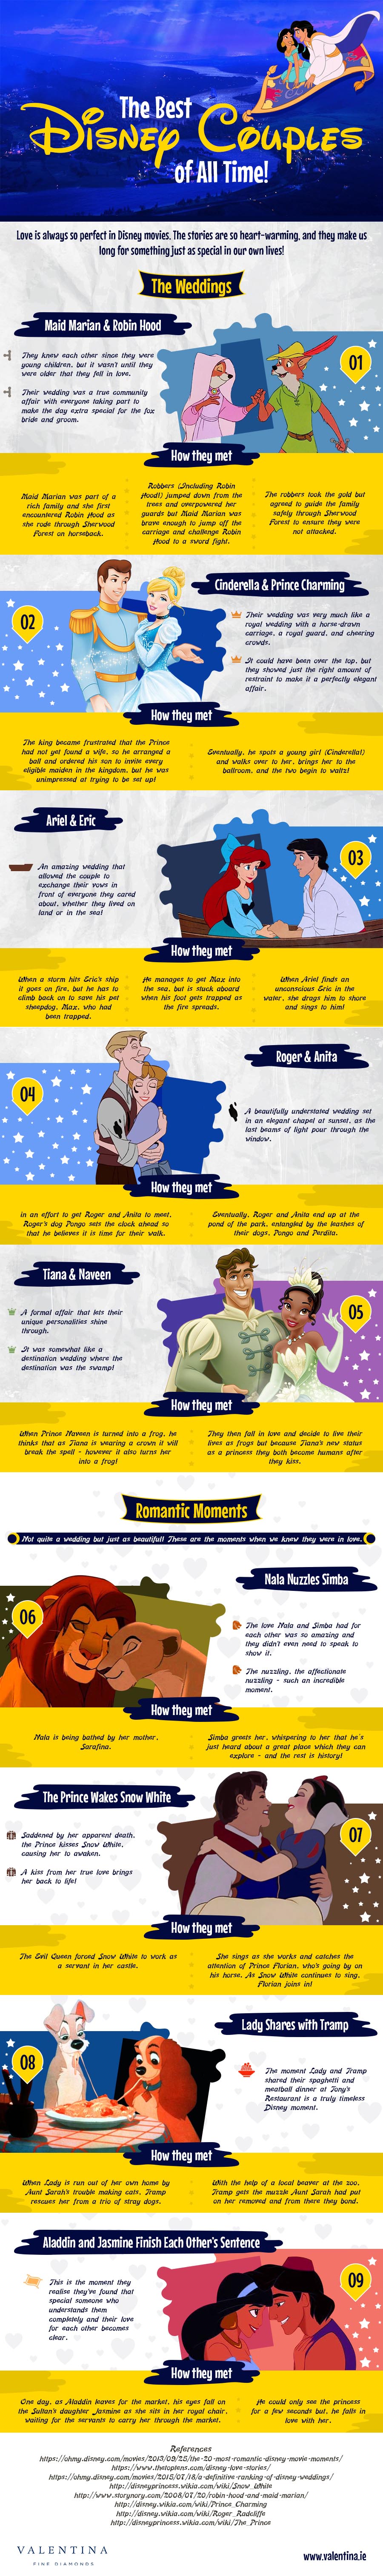 The Best Disney Couples of All Time